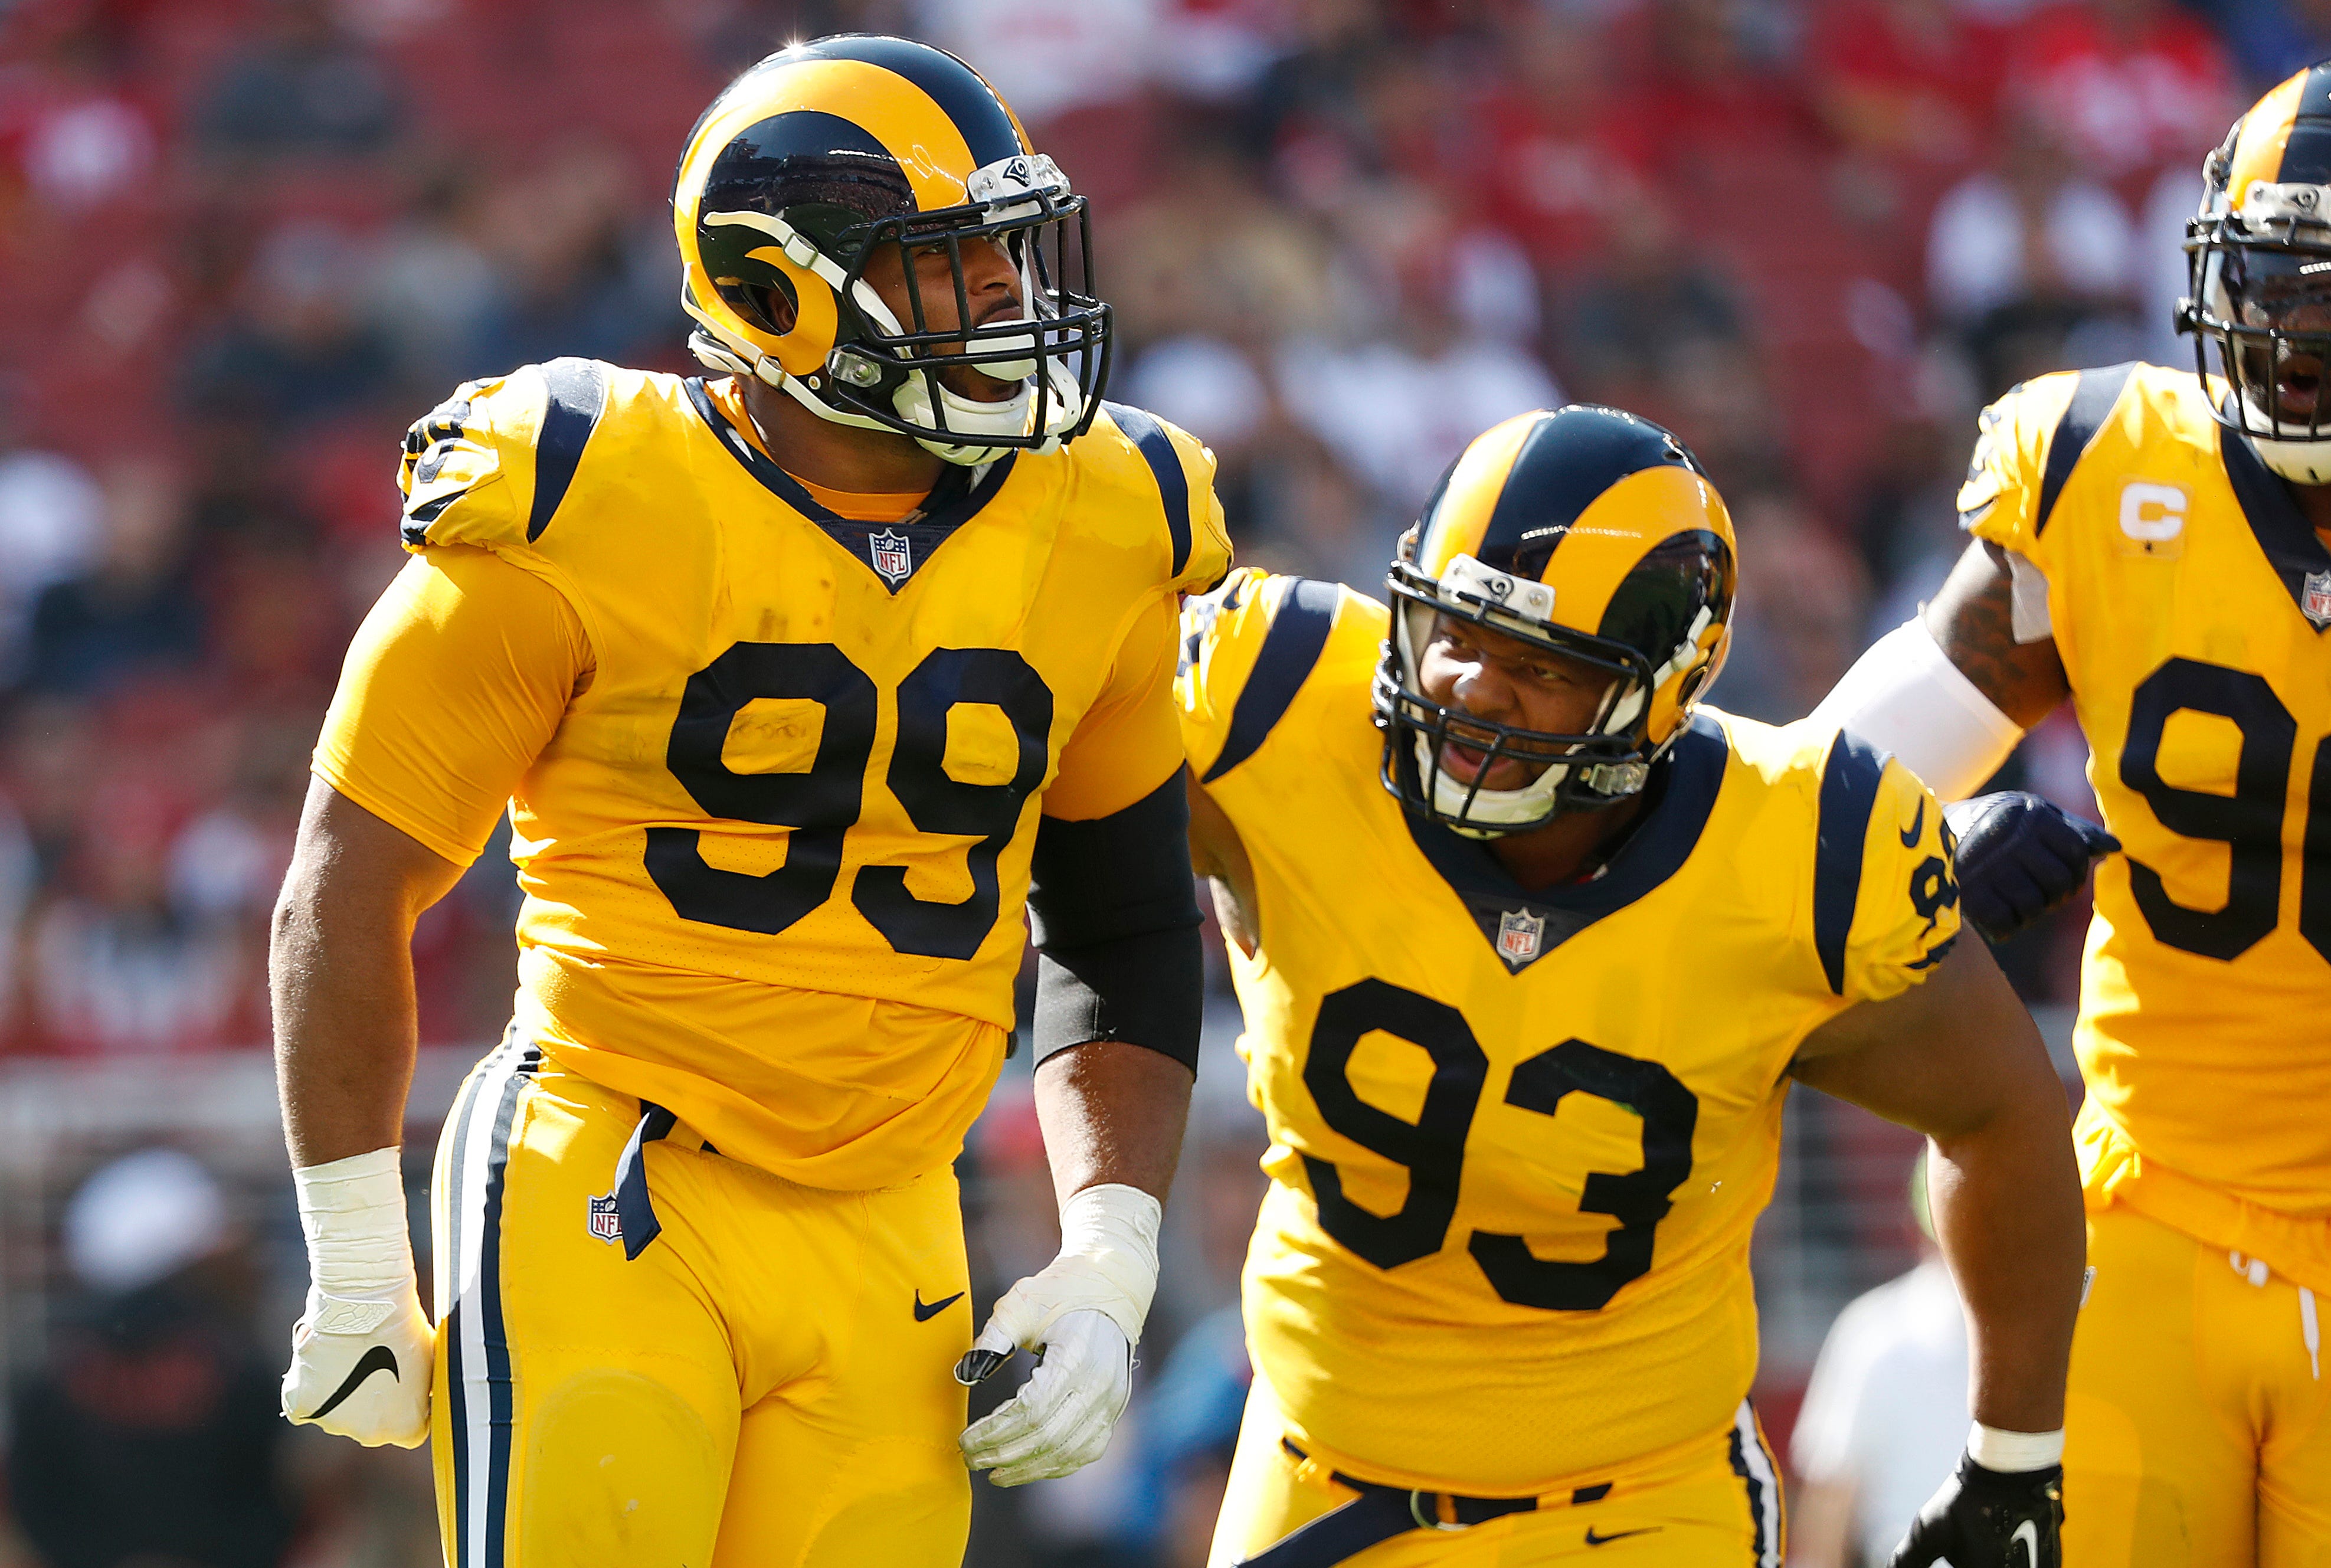 Detroit Lions passed on Aaron Donald in 